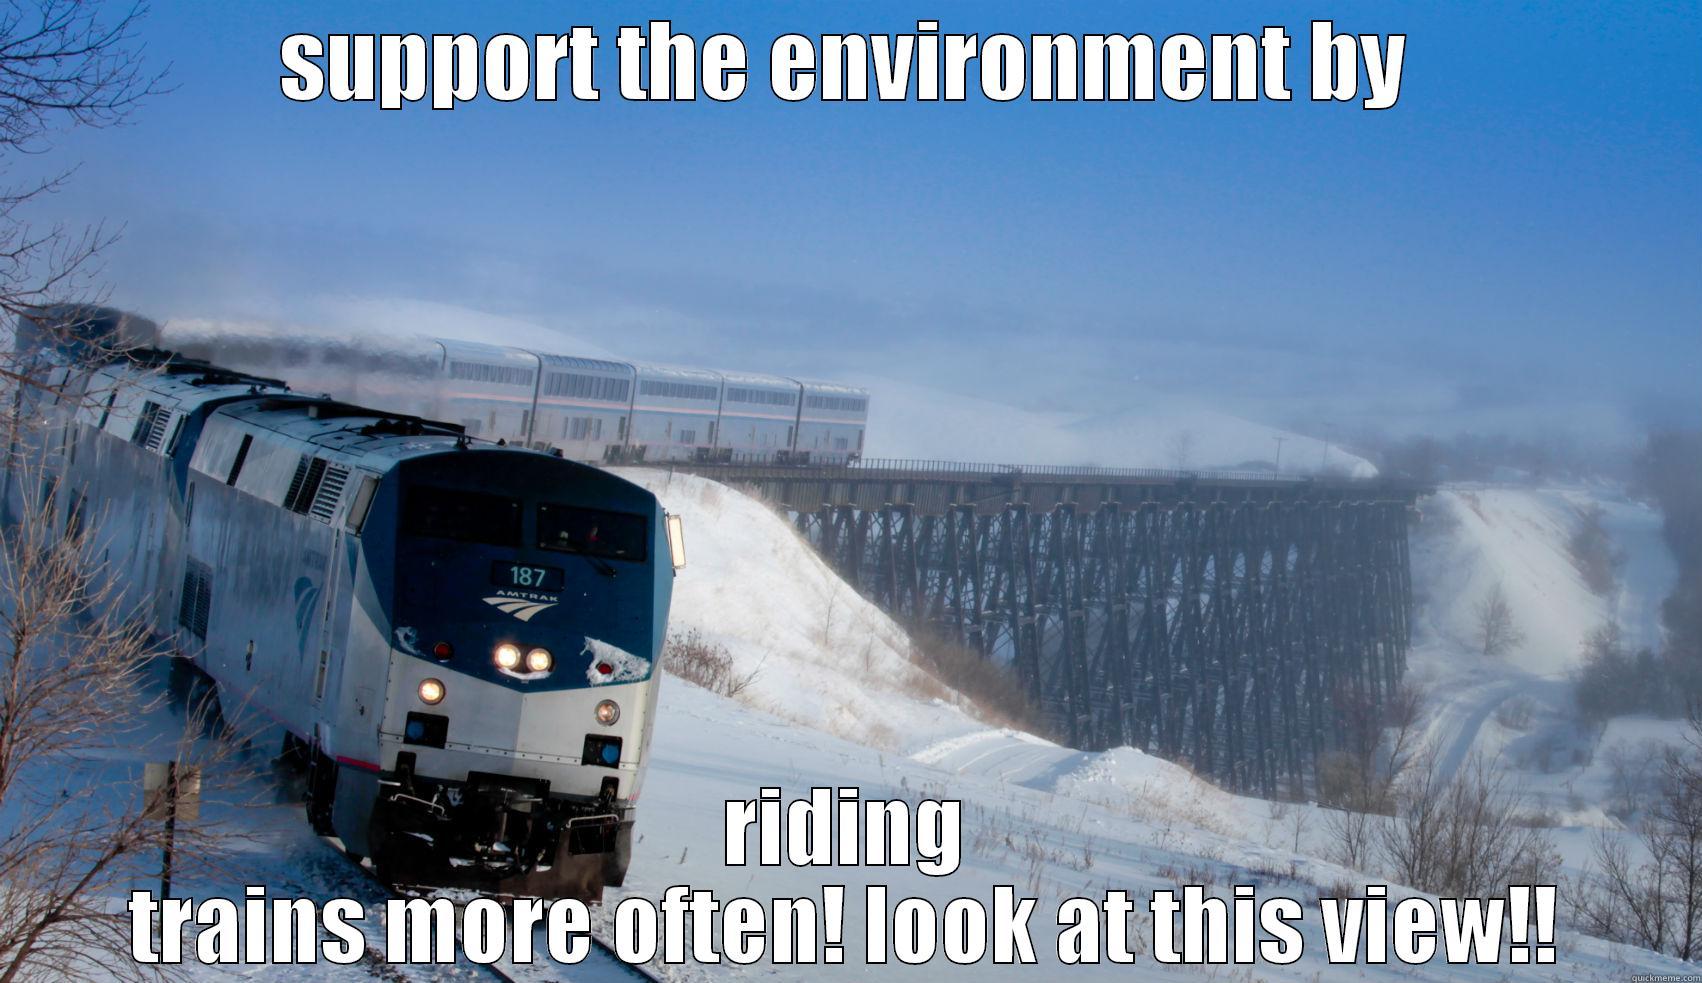 train meme - SUPPORT THE ENVIRONMENT BY RIDING TRAINS MORE OFTEN! LOOK AT THIS VIEW!! Misc